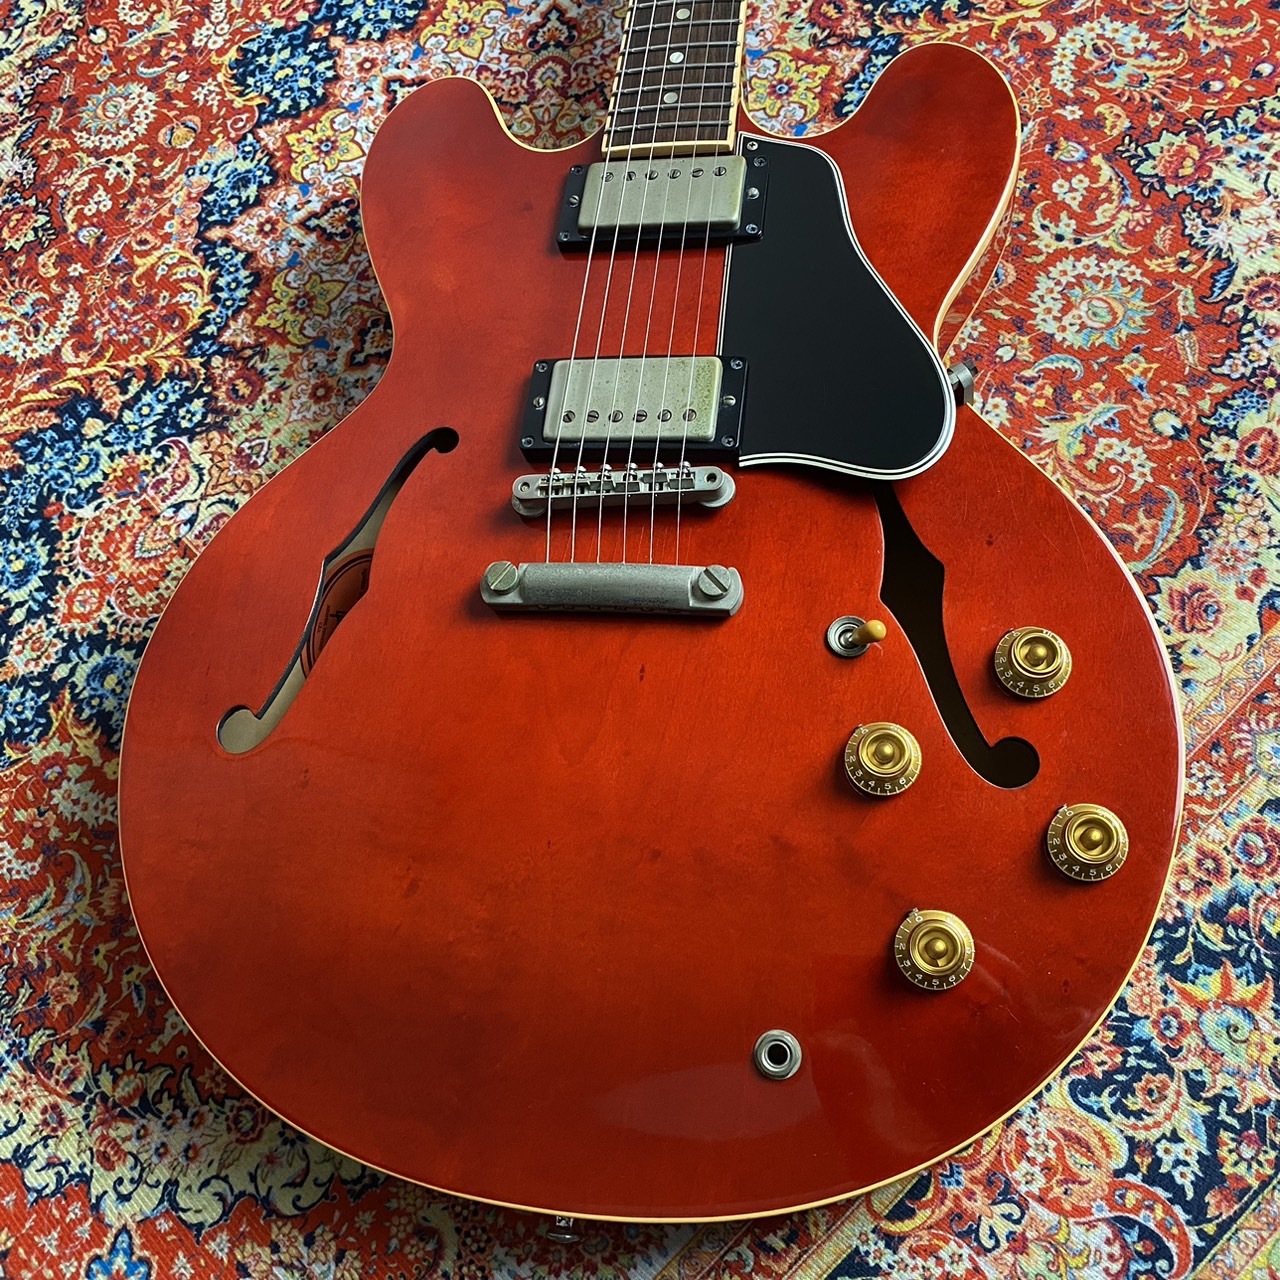 GibsonES-335 - Cherry (Modify)【jimmy wallace PAF Covered 搭載】 